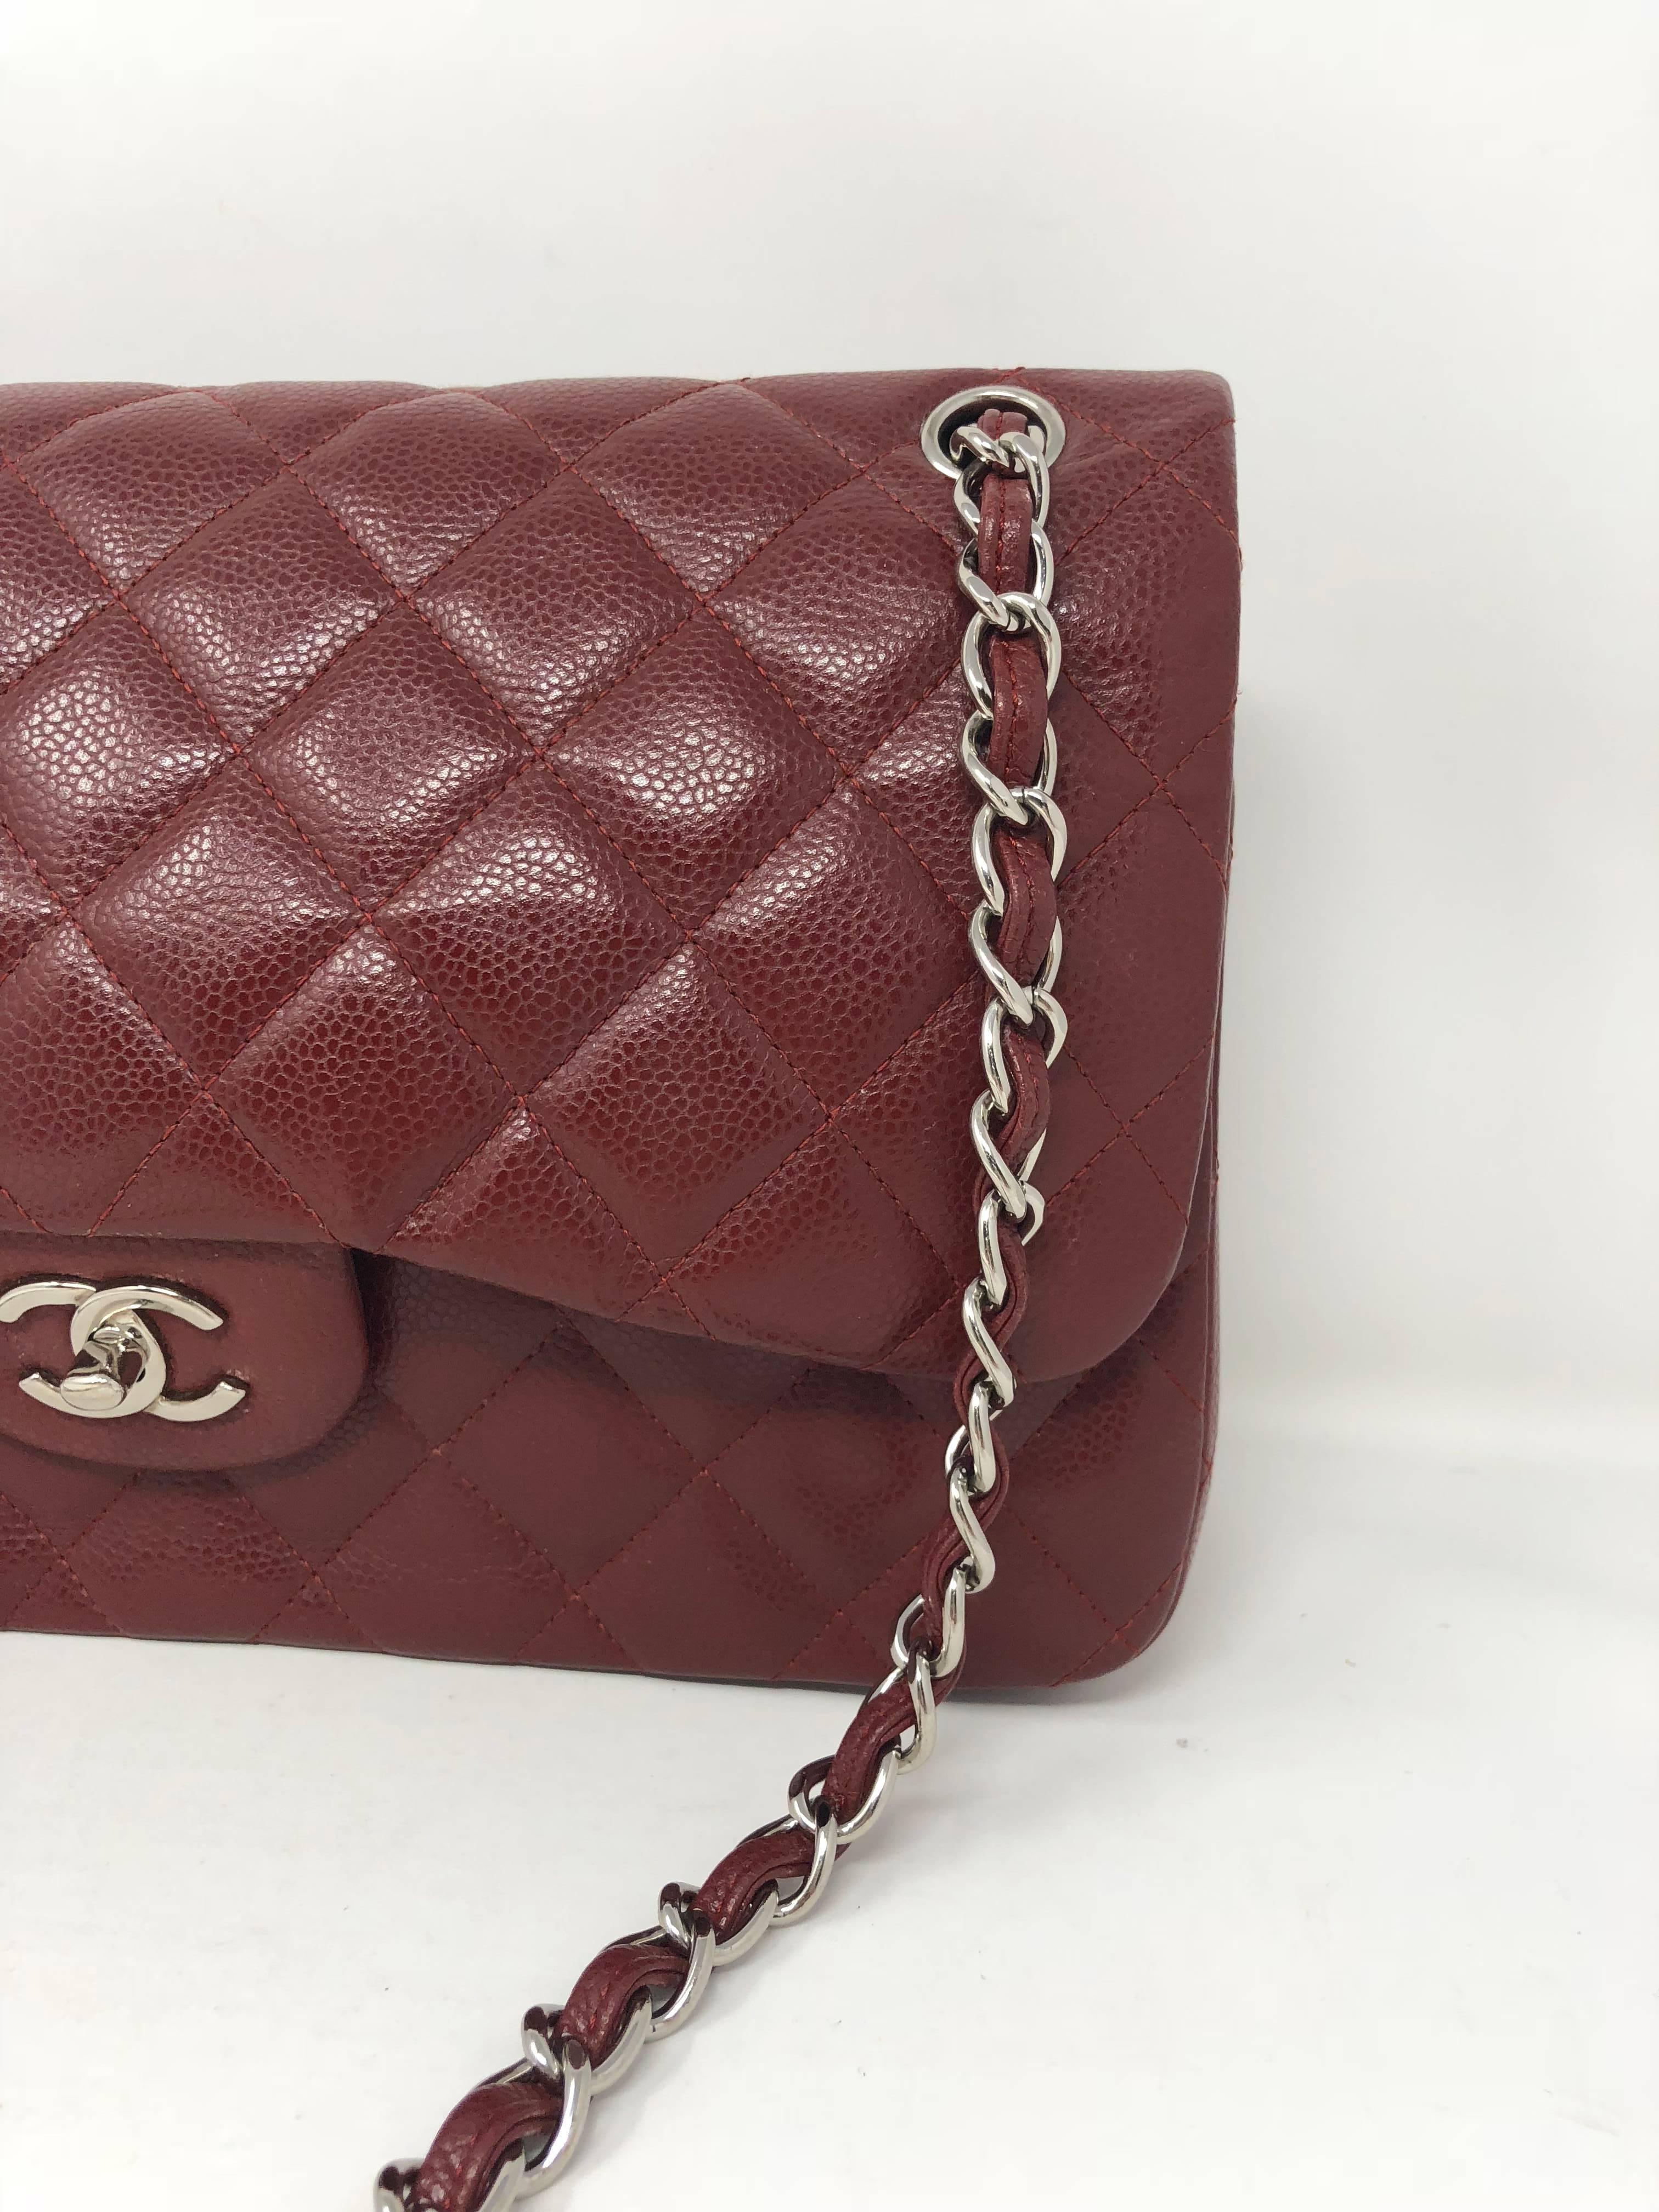 Burgundy Chanel Caviar Jumbo Double Flap Bag with silver hardware. Hard to find color Jumbo bag in good condition. Light wear and chain is shiny and looks hardly worn. Can be worn with strap doubled or a longer crossbody. 